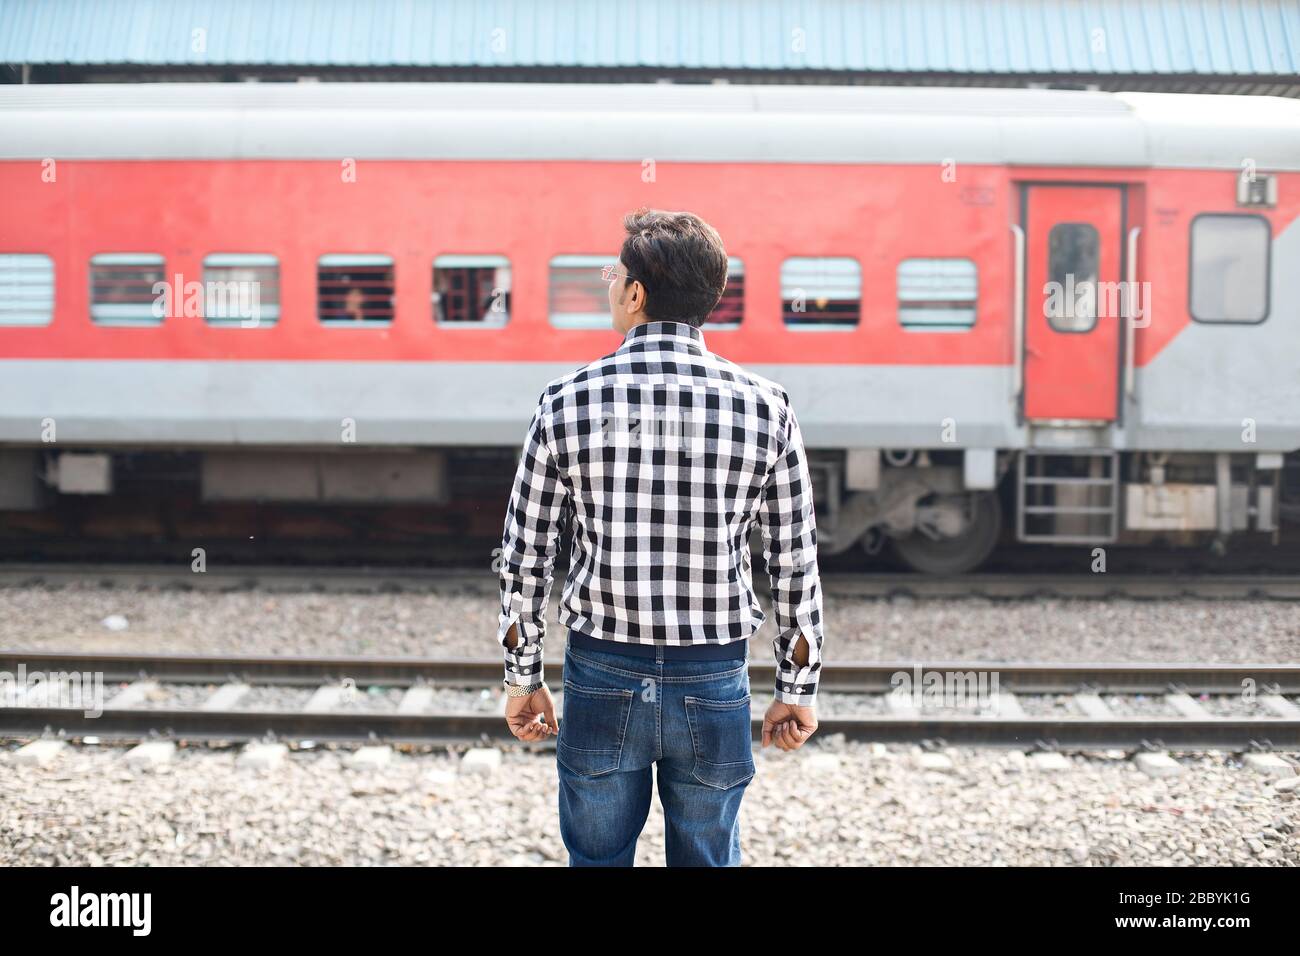 Rear view of man standing at railroad station Stock Photo